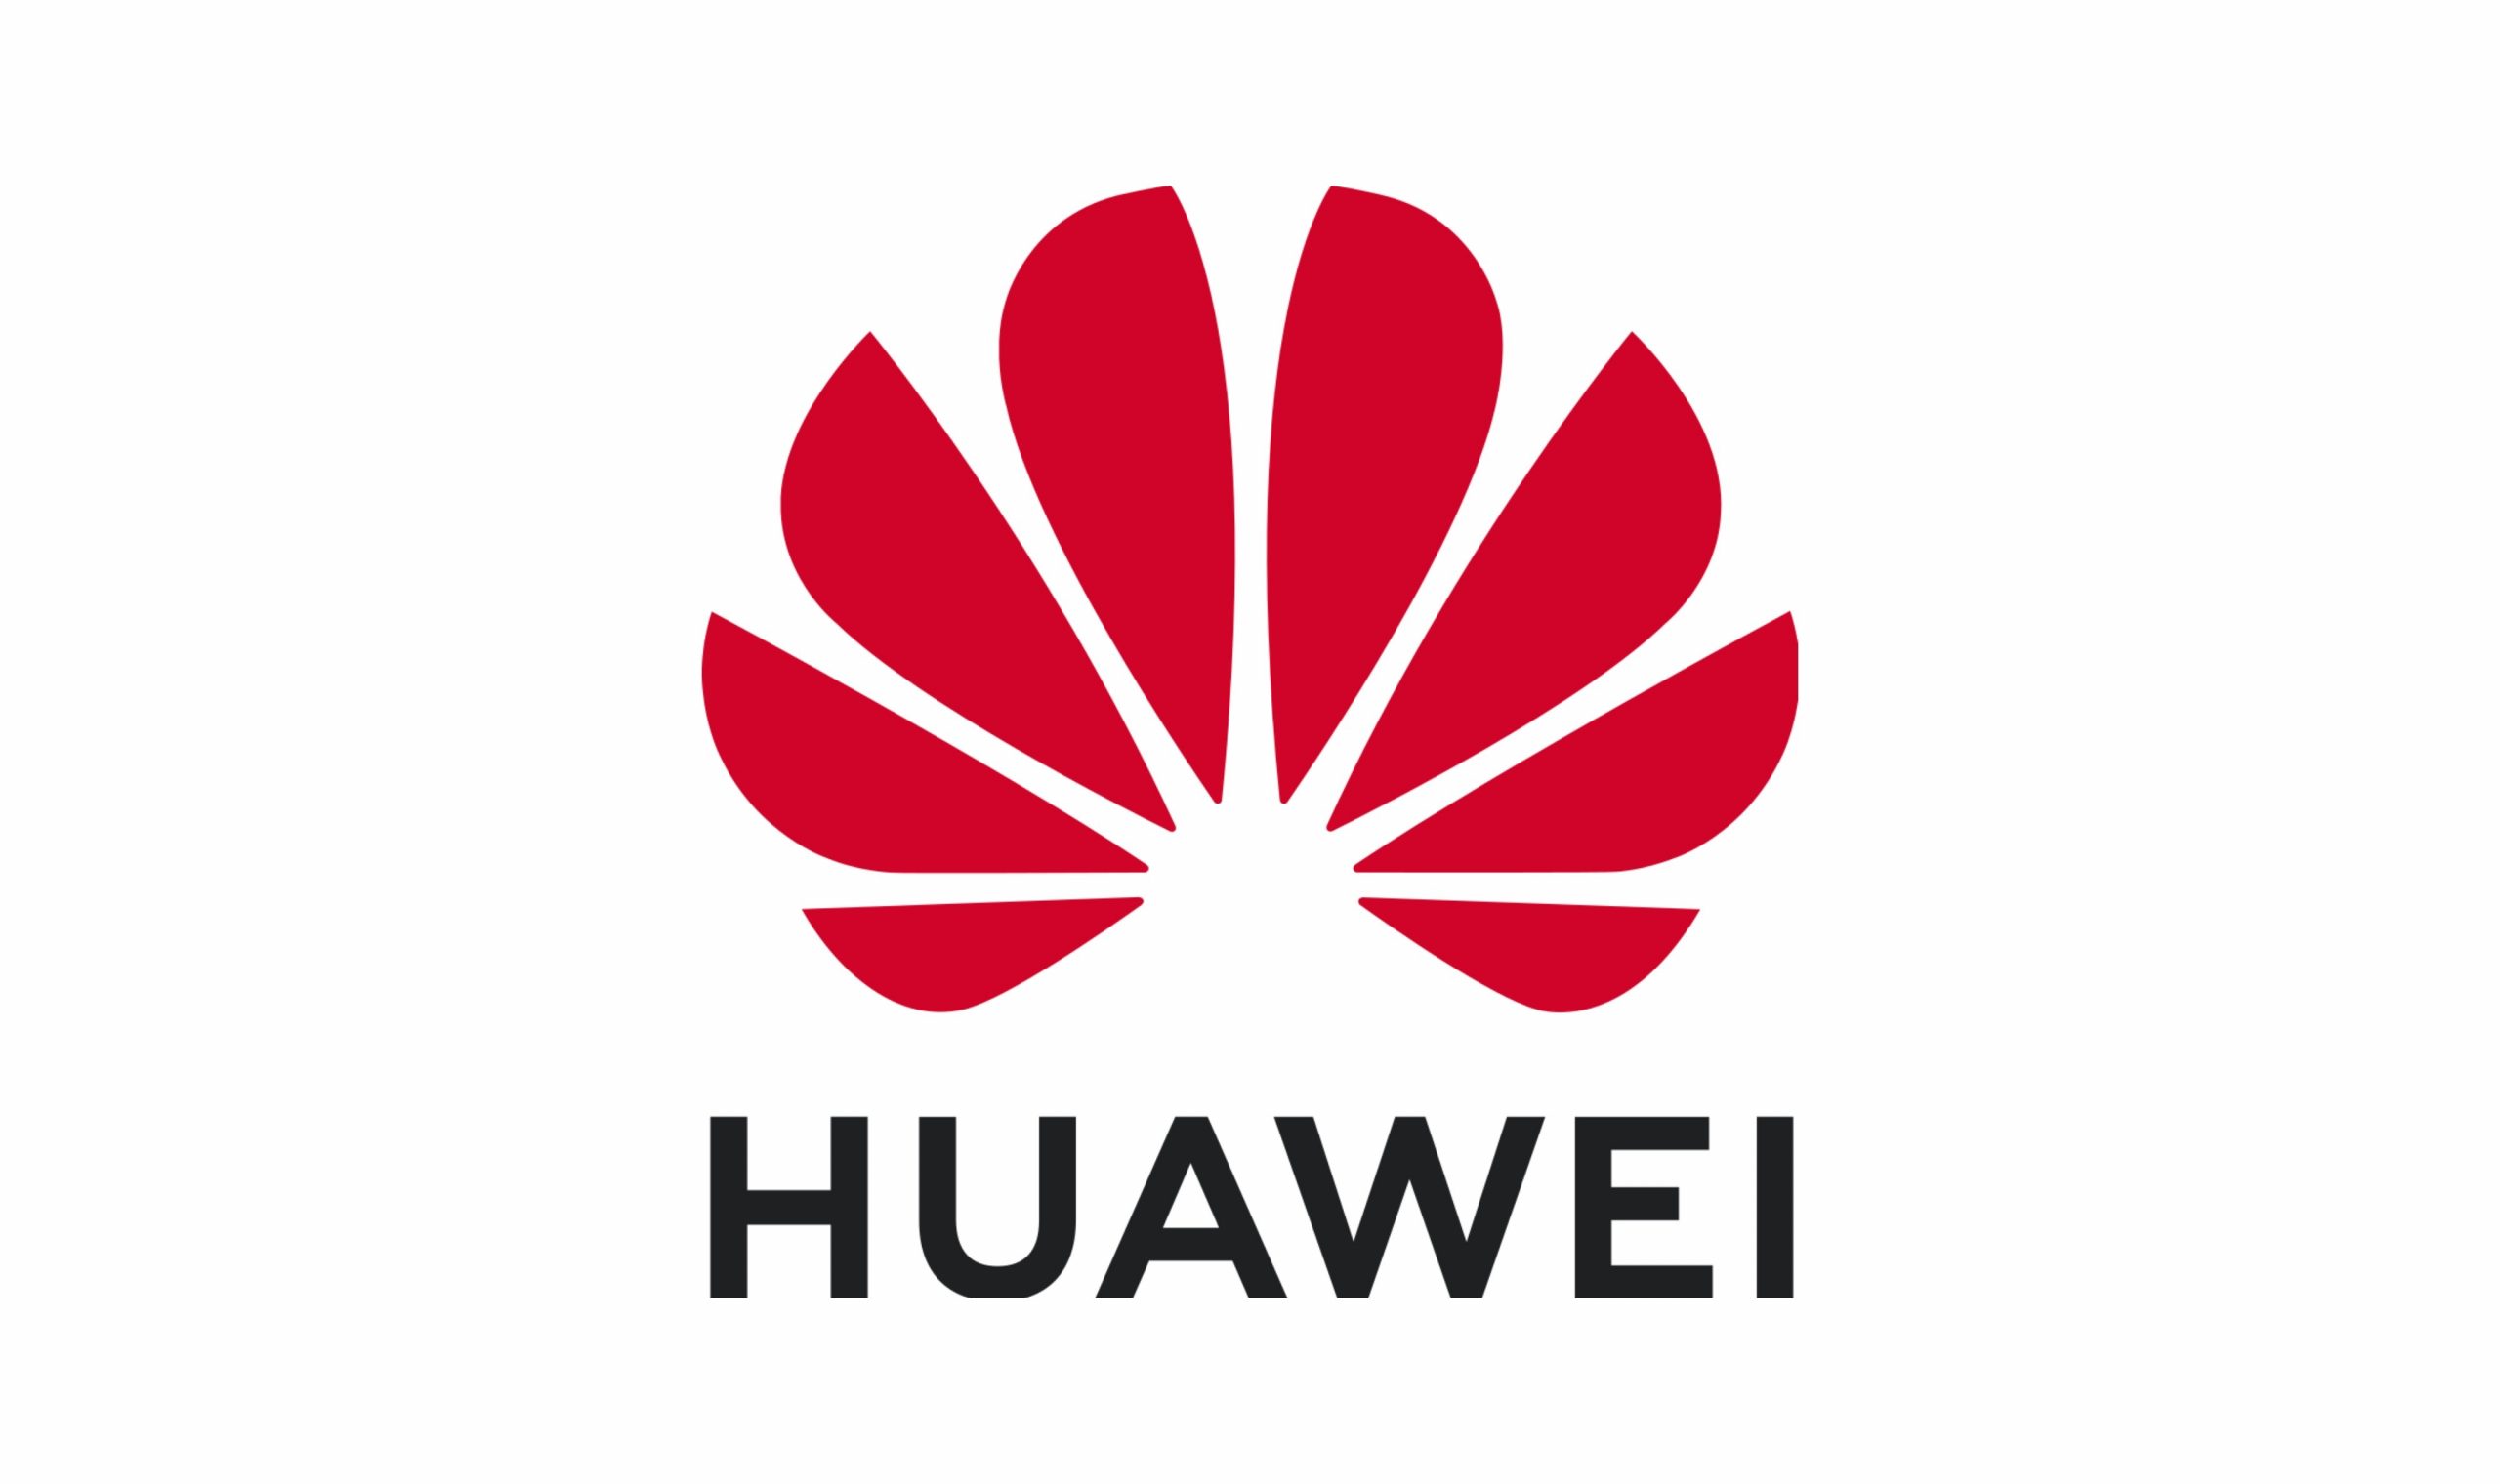 Huawei trademarks “Mate” branding for eight new product categories